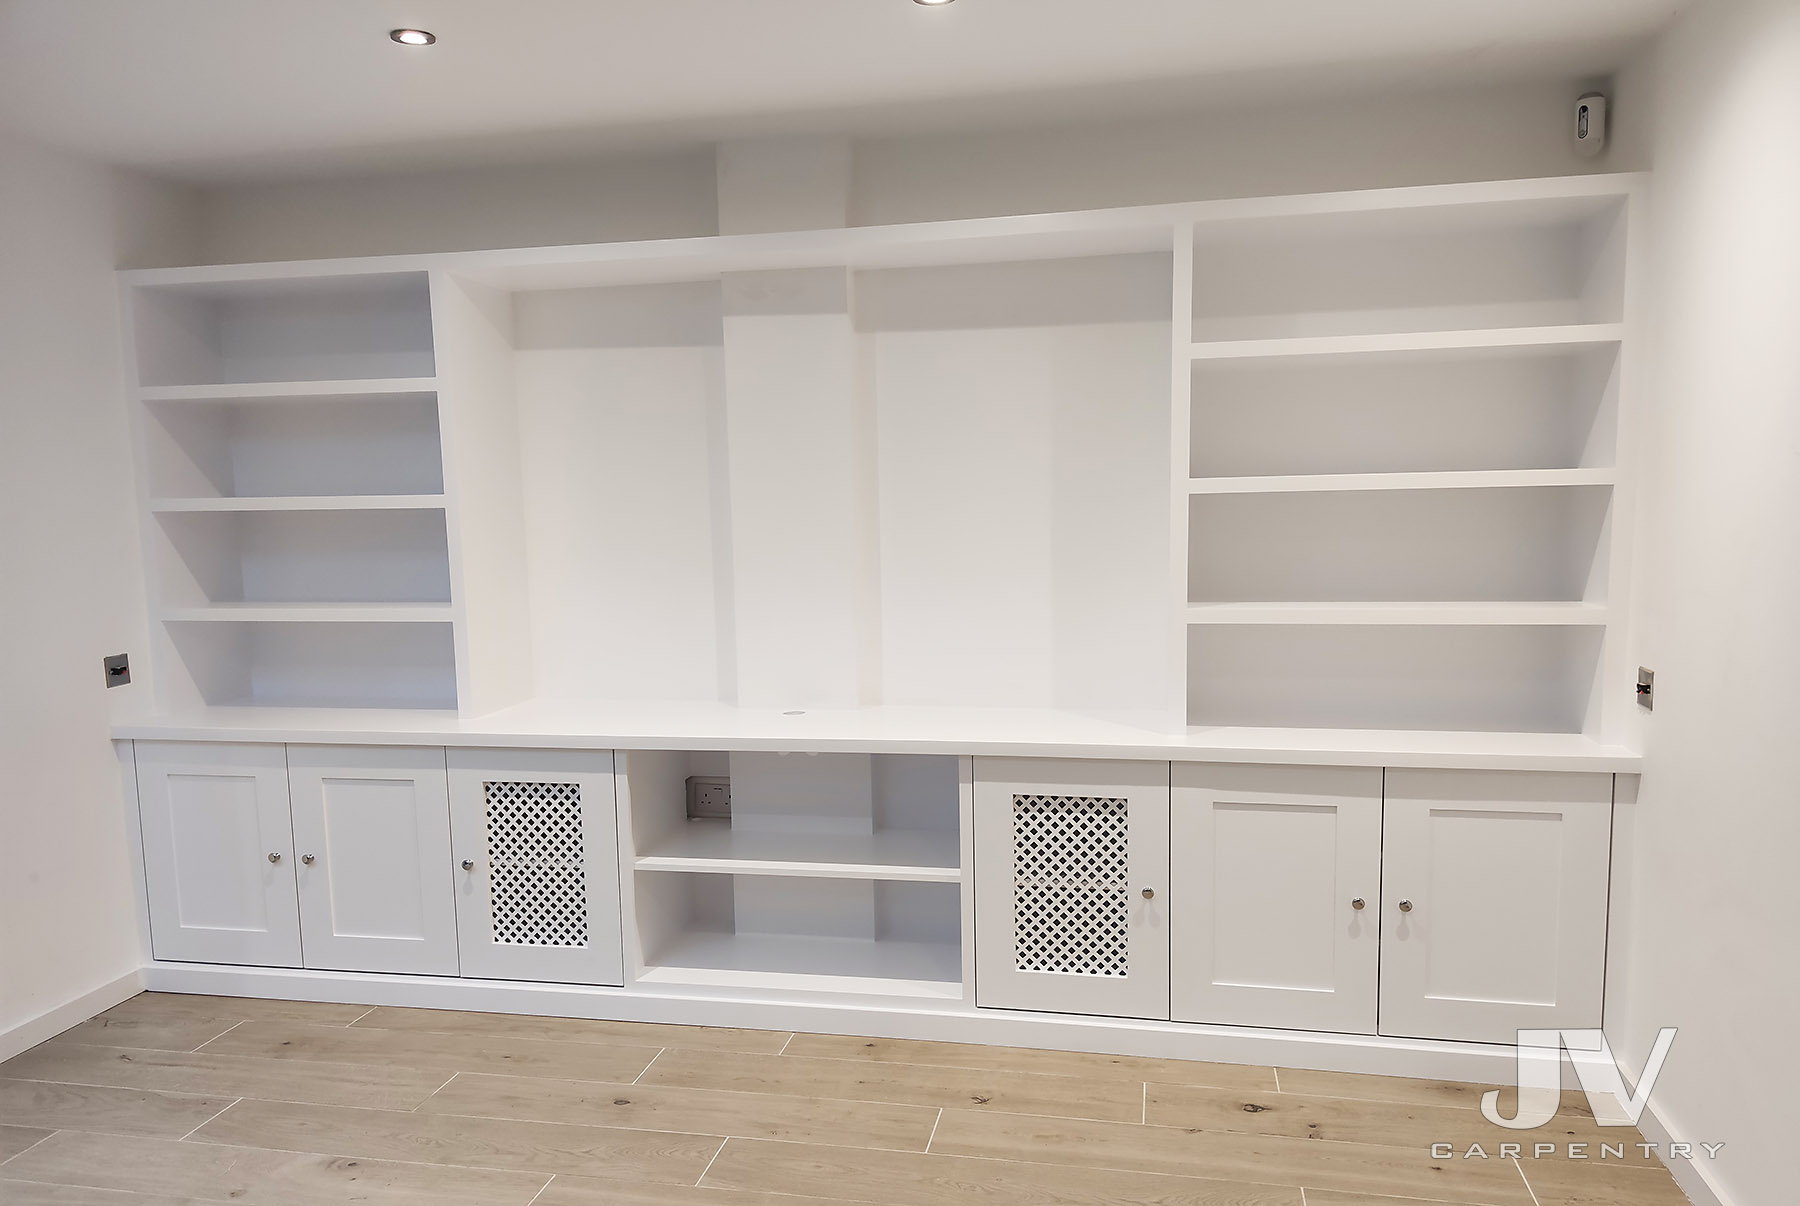 The whole wall bookcase with cabinet